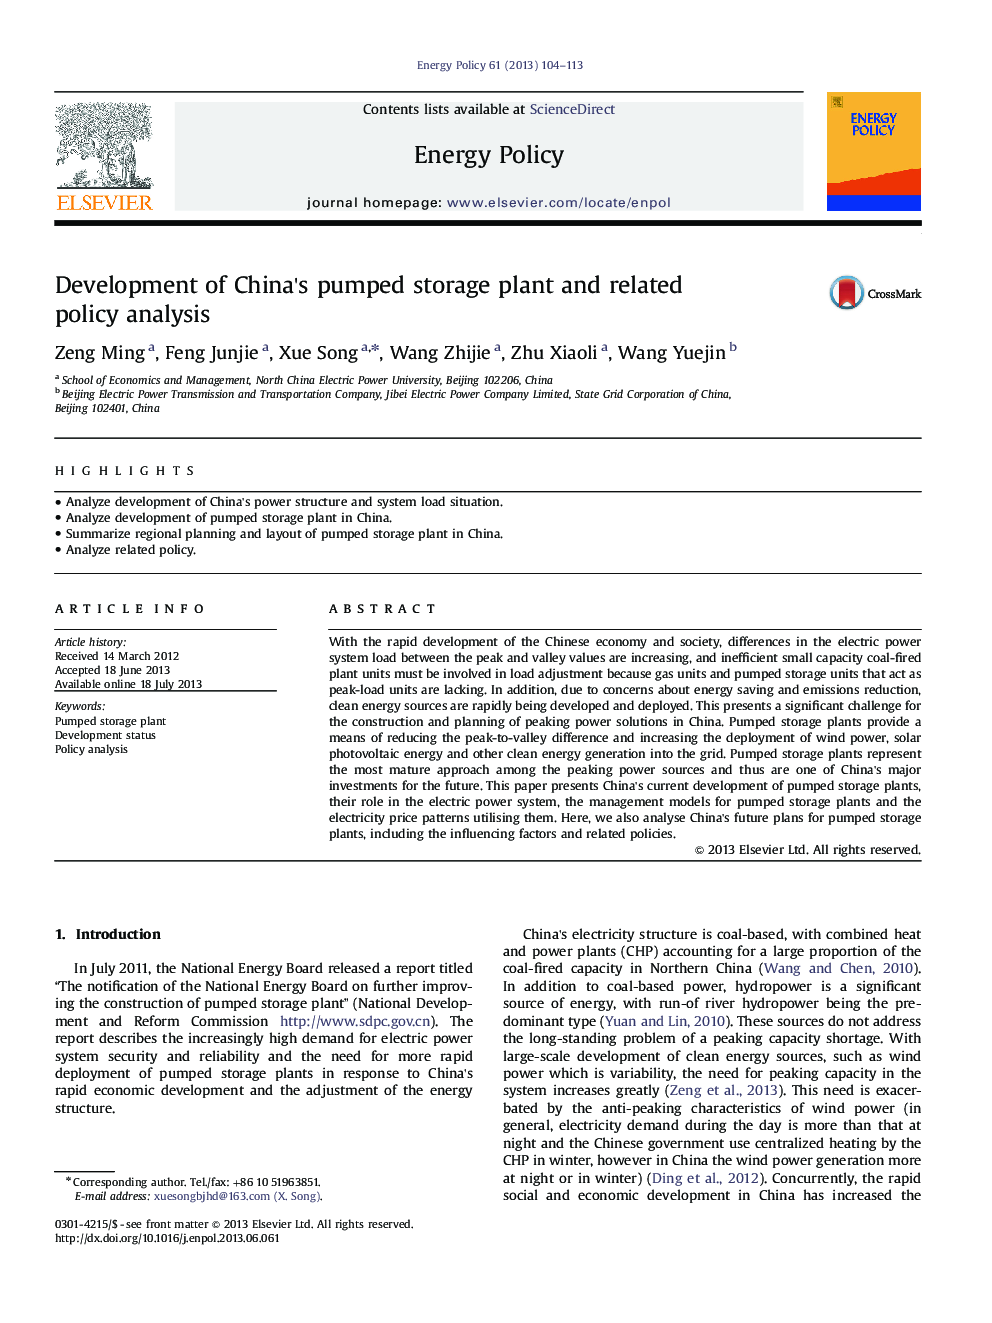 Development of China's pumped storage plant and related policy analysis